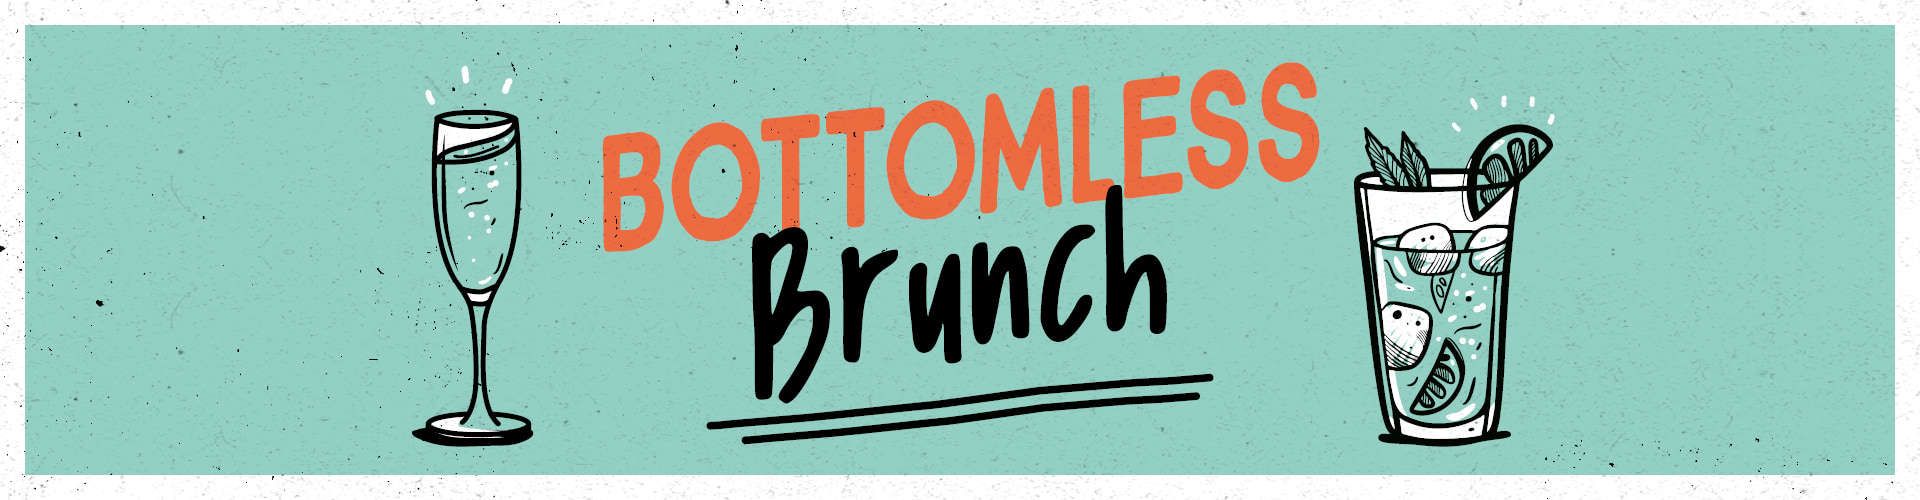 Bottomless Brunch with Image of Cocktails